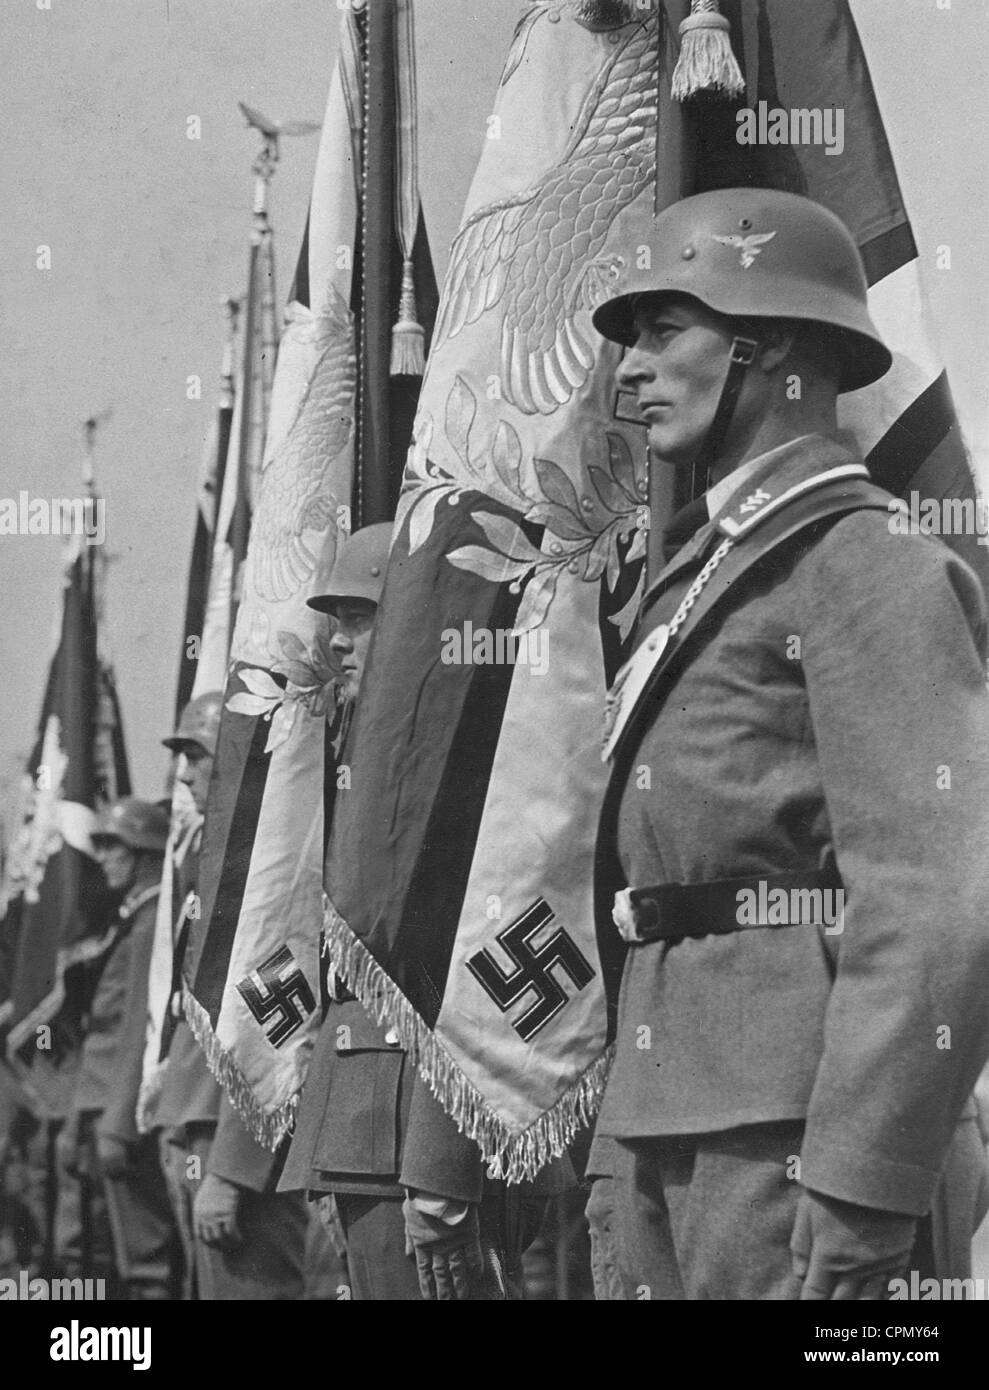 Flag bearers of the air force, 1937 Stock Photo